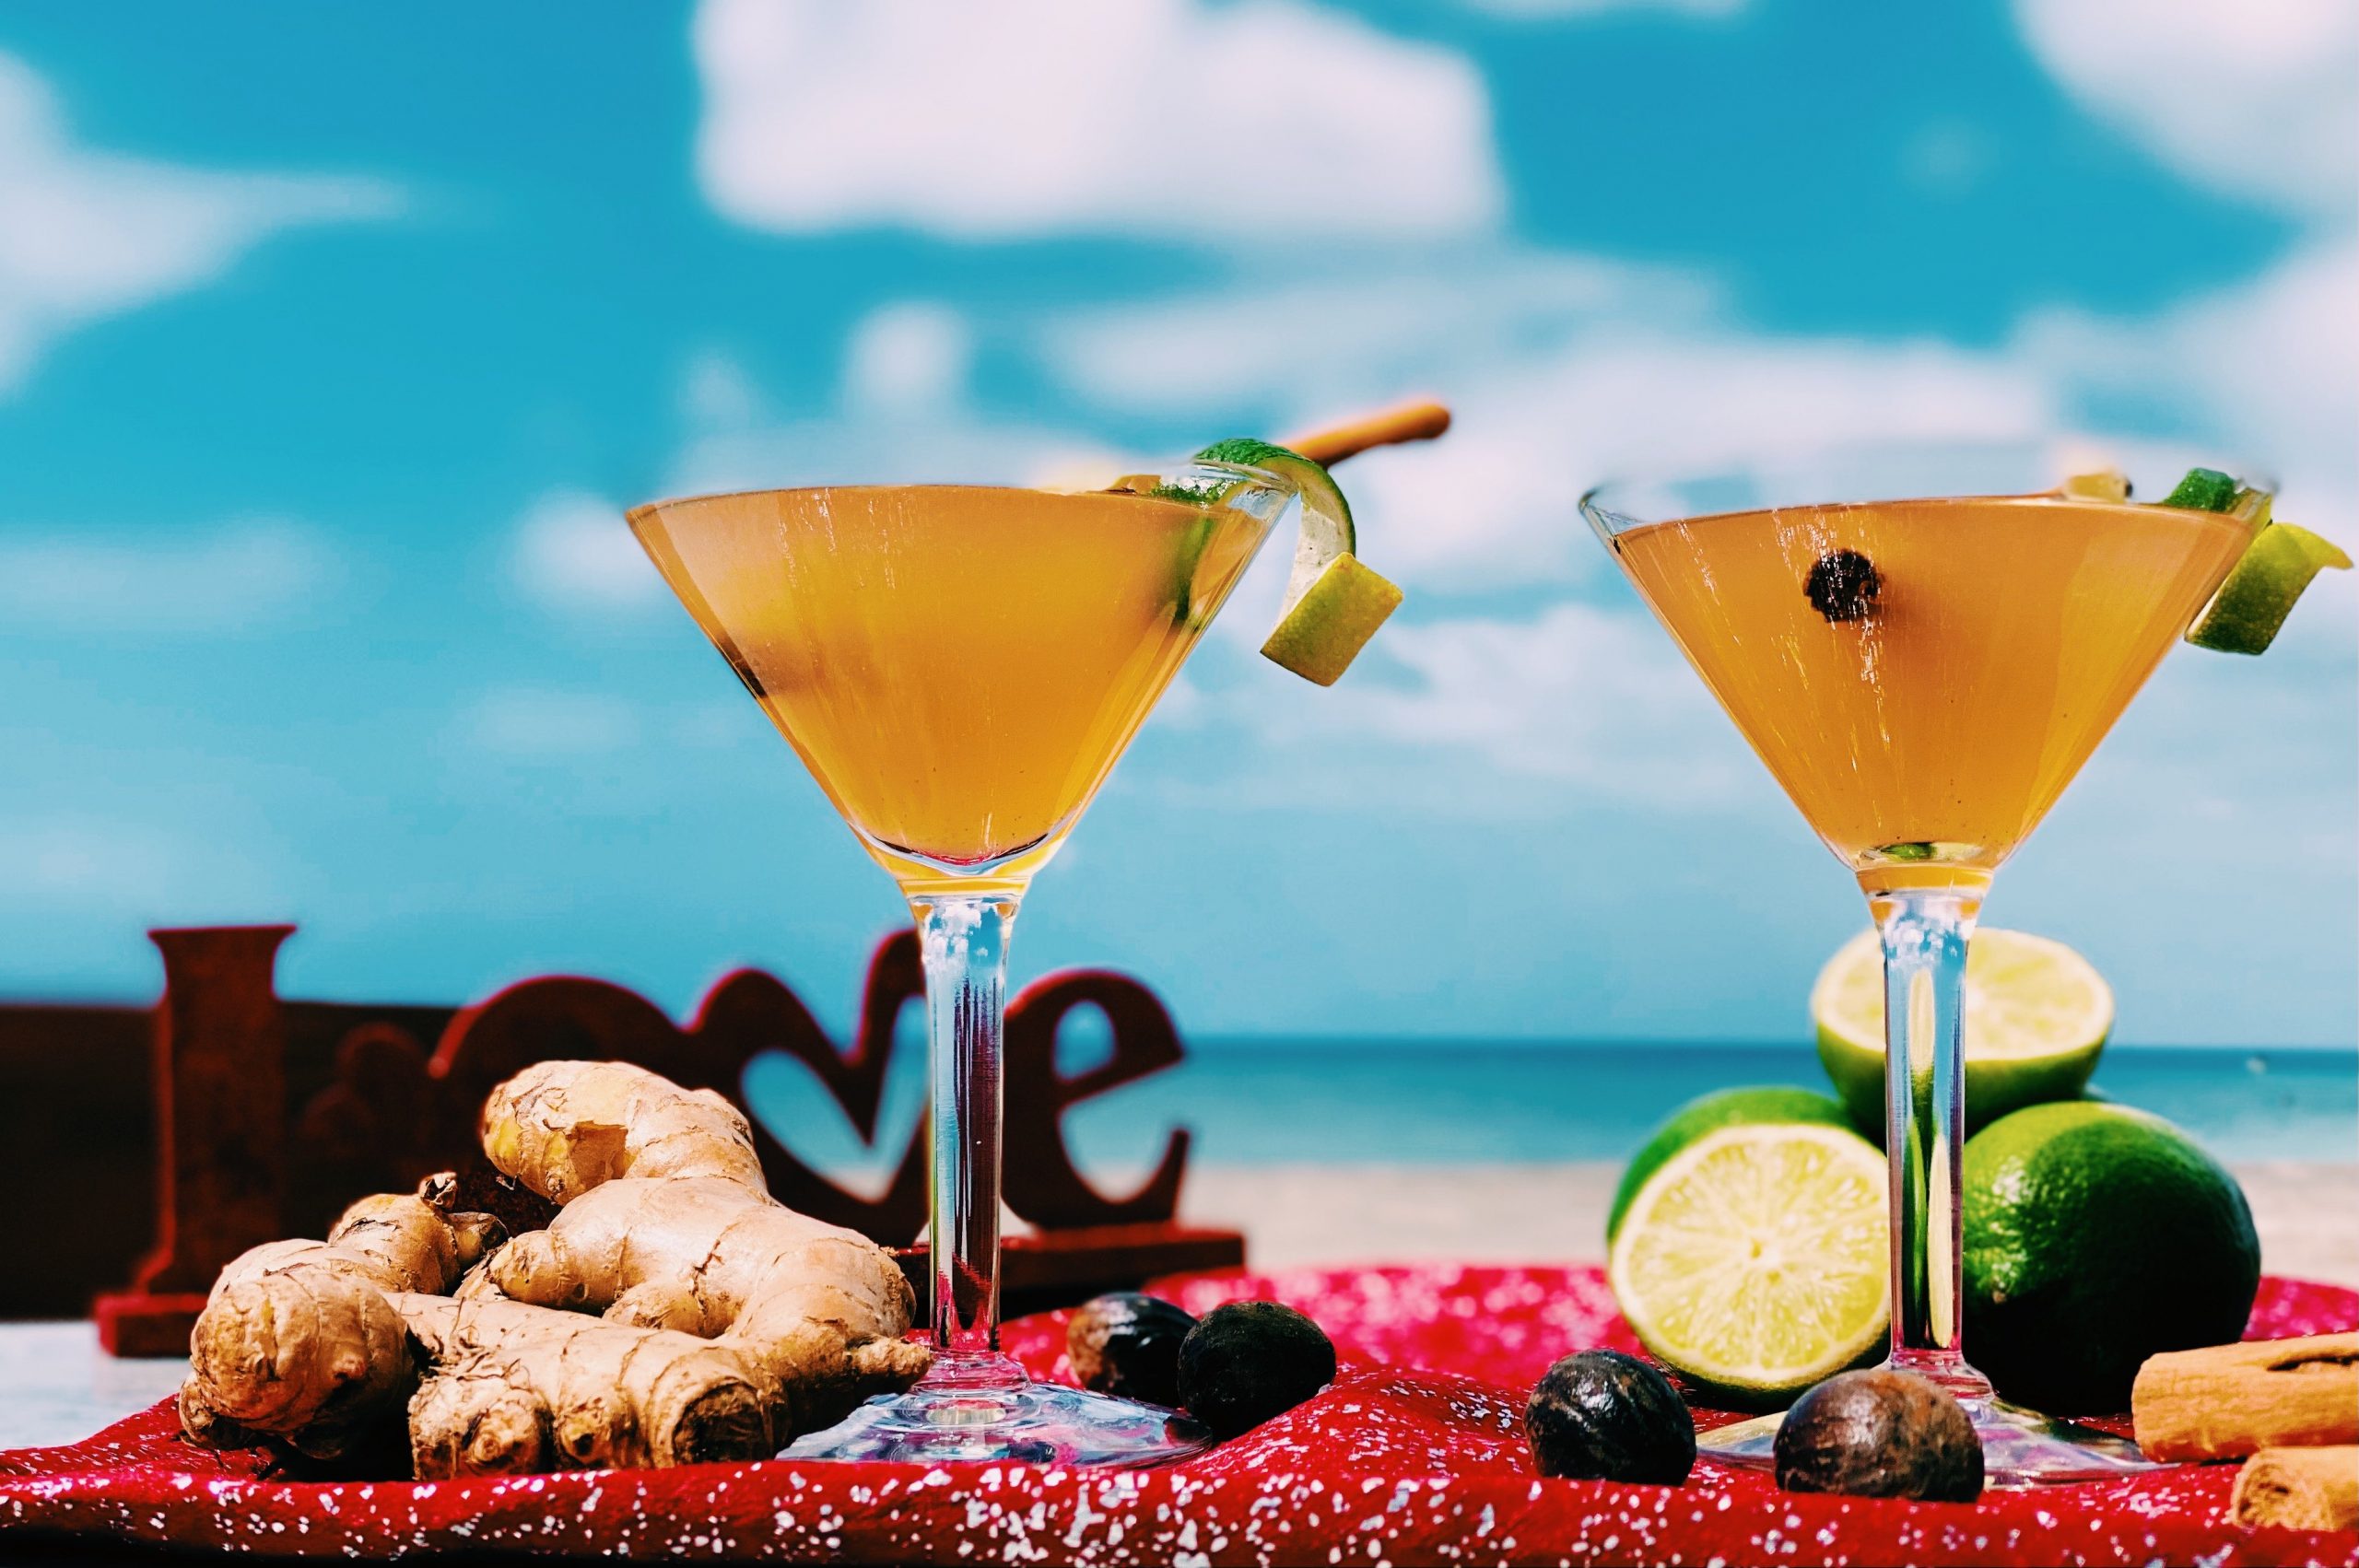 The Nevisian Kiss, a signature cocktail with aphrodisiac properties to inspire love and romance on Valentine’s Day on February 14, 2021, created by Mr. Kremour Maloney, an award-winning Nevisian mixologist, (photo provided)